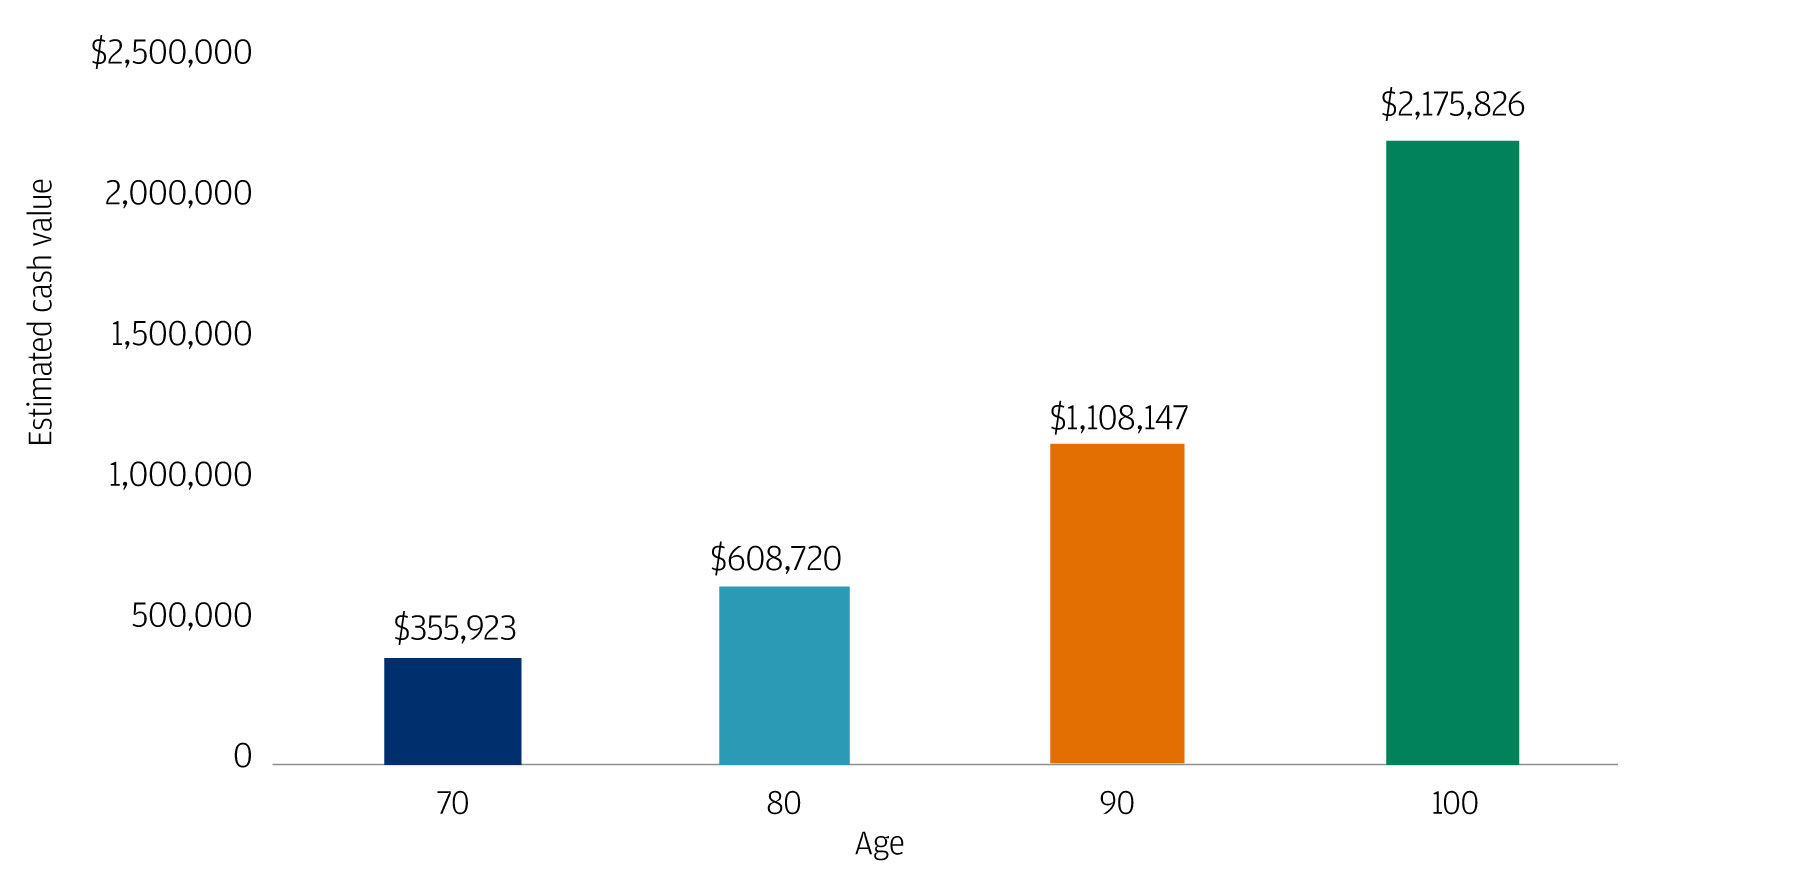 This bar graph shows an illustration for a permanent life insurance policy with a $1,000,000 benefit, and a planned annual premium of $13,200 for the first 10 years of the contract for 45-year-old male.